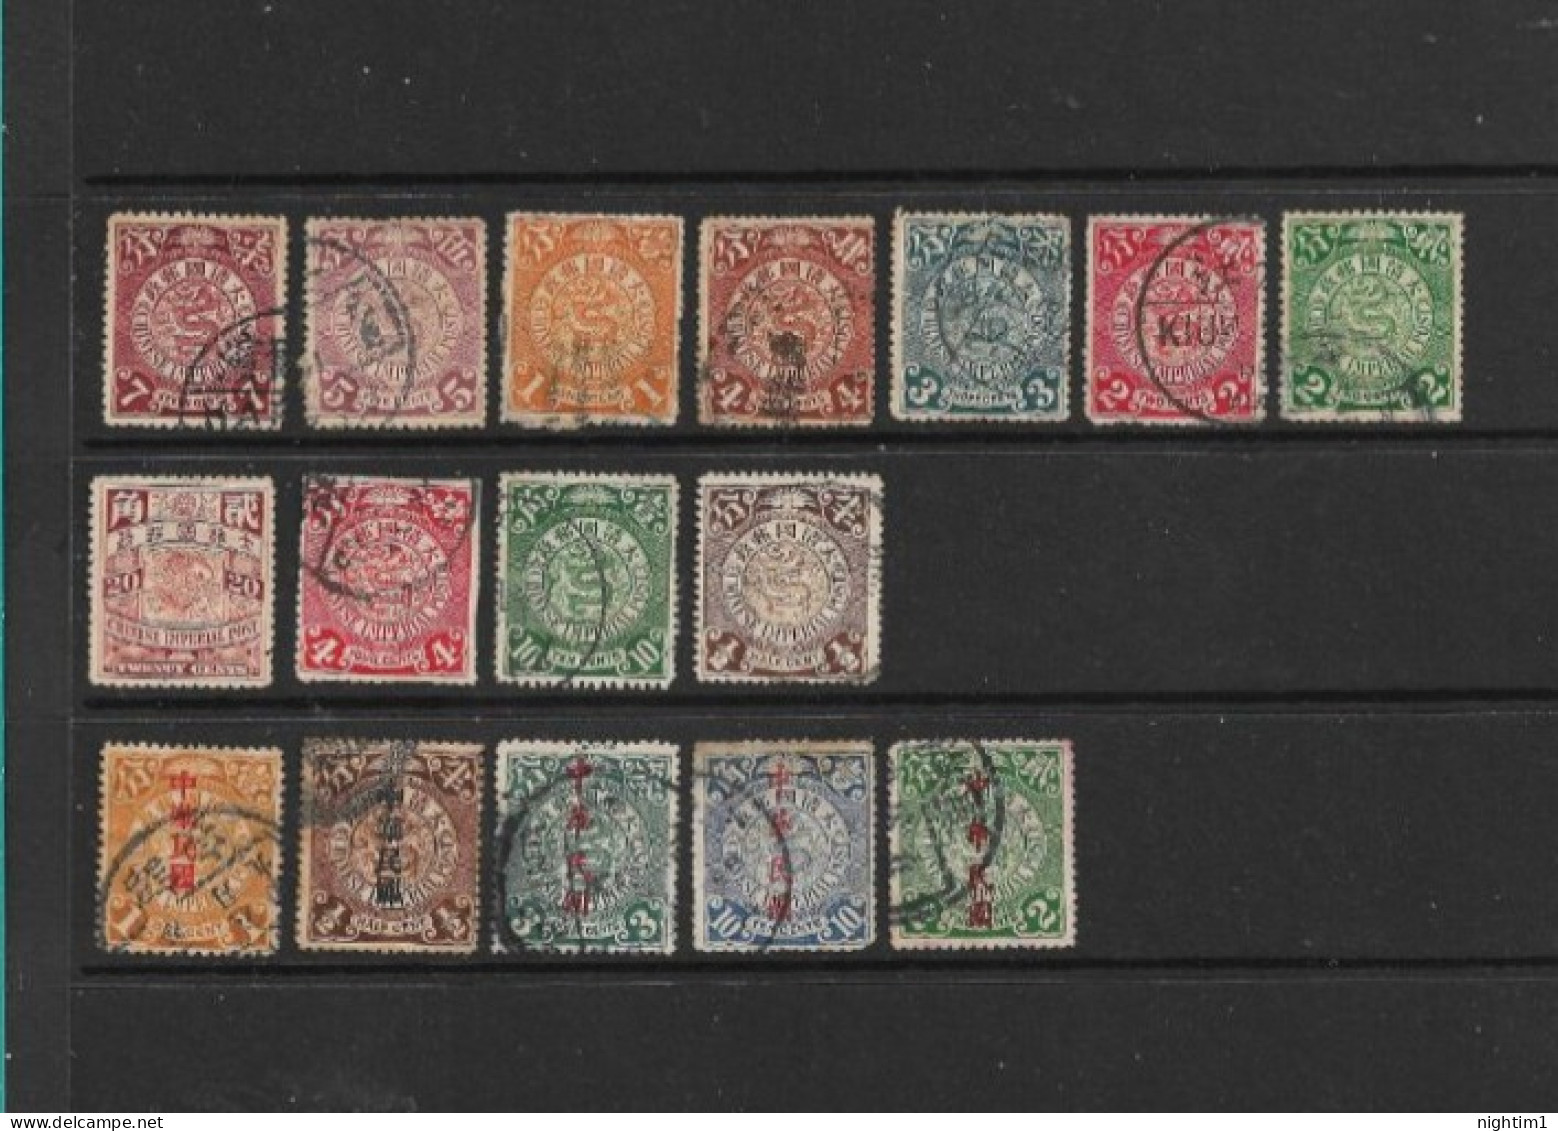 CHINA COLLECTION. COILED SEPENTS USED WITH OVERPRINTED VALUES. NO.2. - Used Stamps